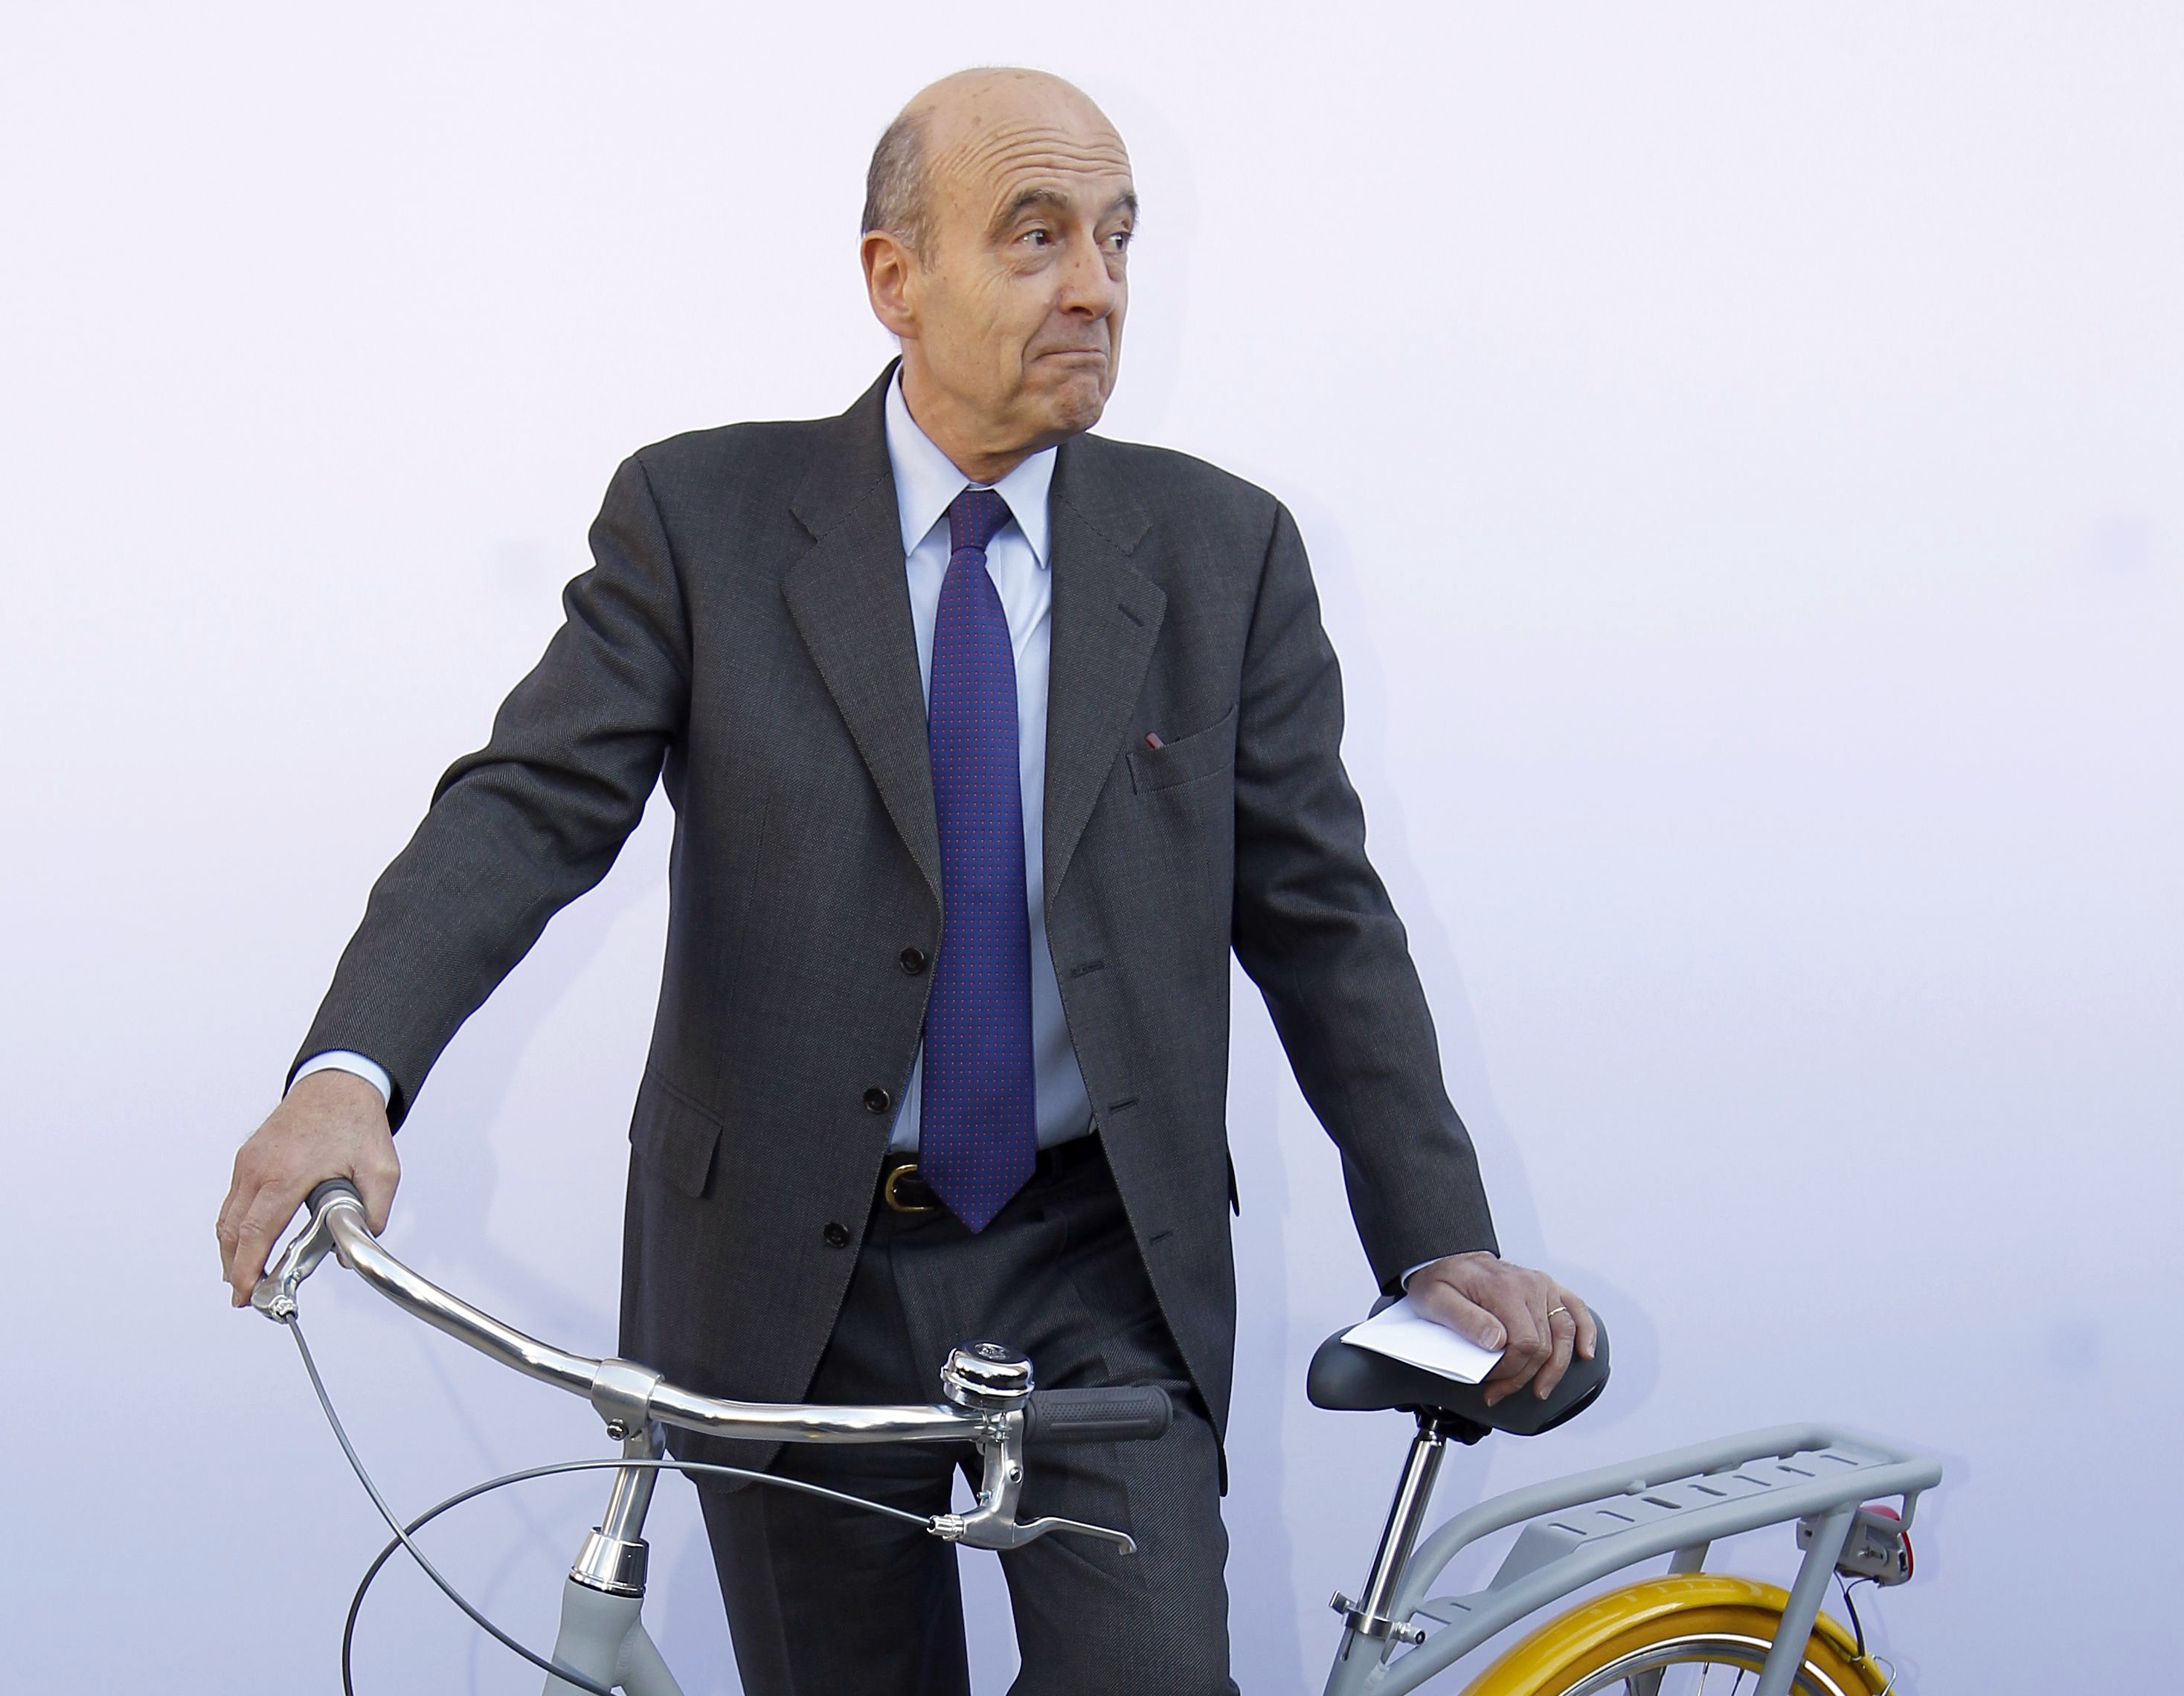 Alain Juppe, Mayor of Bordeaux, poses with the "Pibal" public bicycle designed by French designer Philippe Starck during a presentation at the Bordeaux city hall February 19, 2013. The hybrid bicycle, which will be available to the public from September 2013, has a central platform allowing the rider to push it like a scooter during heavy traffic, and has fluorescent tyres for security at night. REUTERS/Regis Duvignau (FRANCE - Tags: BUSINESS SOCIETY)